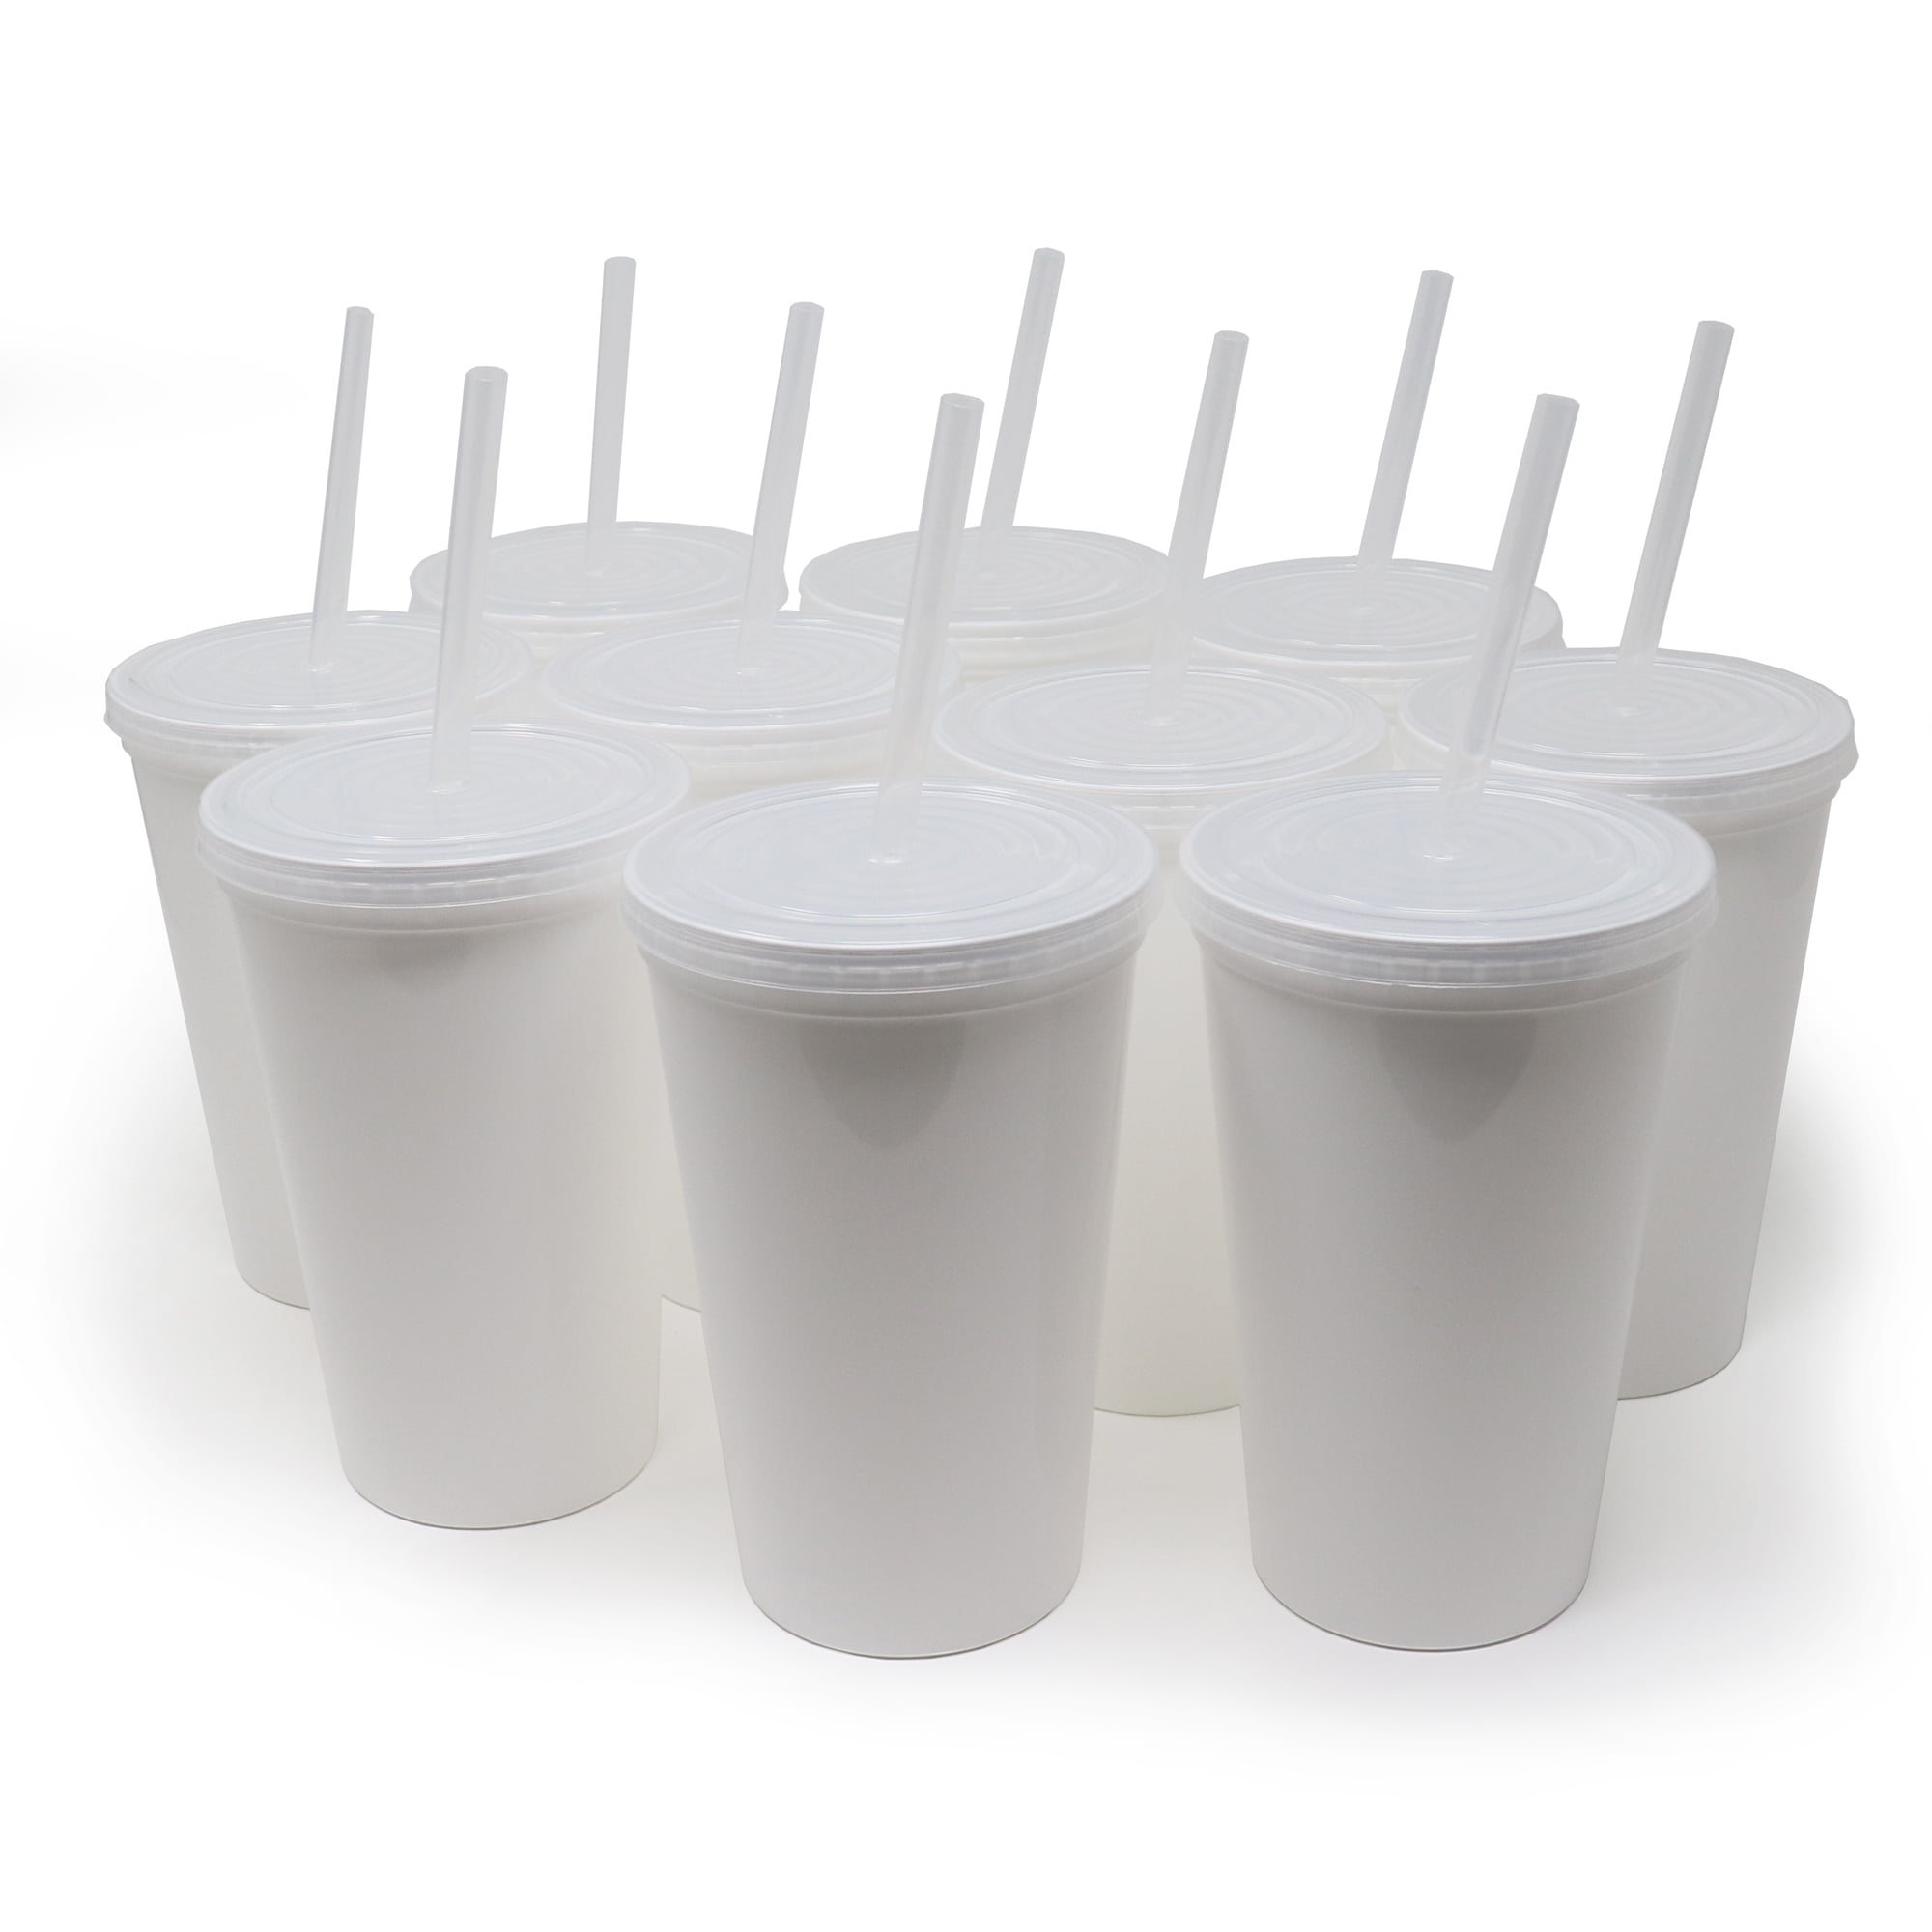  WOPPLXY 4 Pcs Glass Cups with Lids and Straws, 20oz